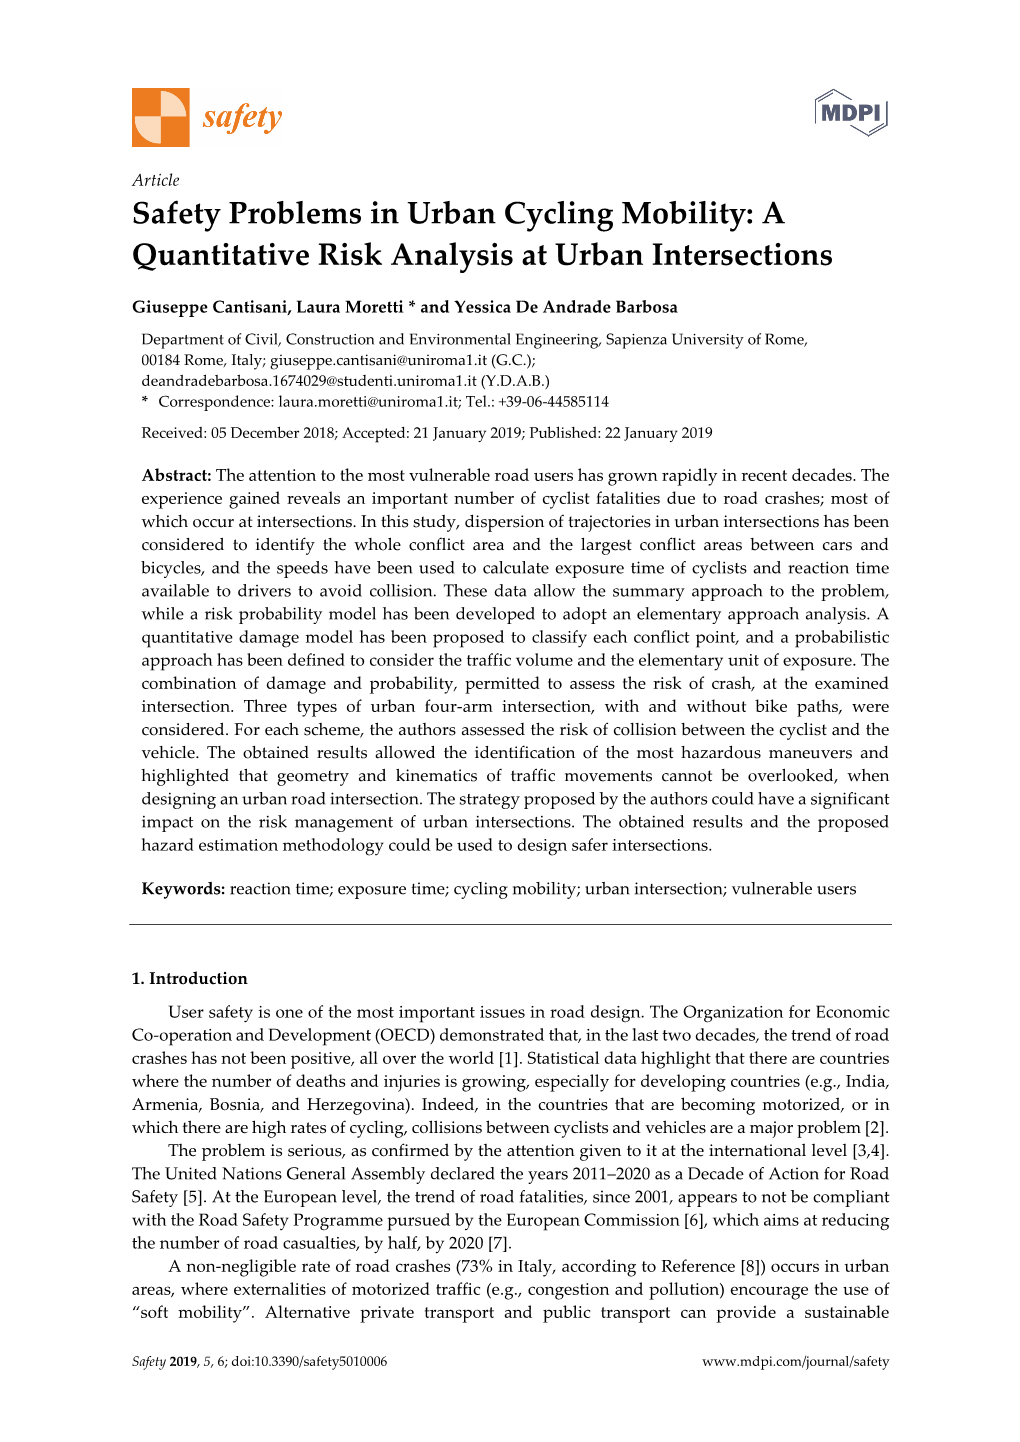 Safety Problems in Urban Cycling Mobility: a Quantitative Risk Analysis at Urban Intersections